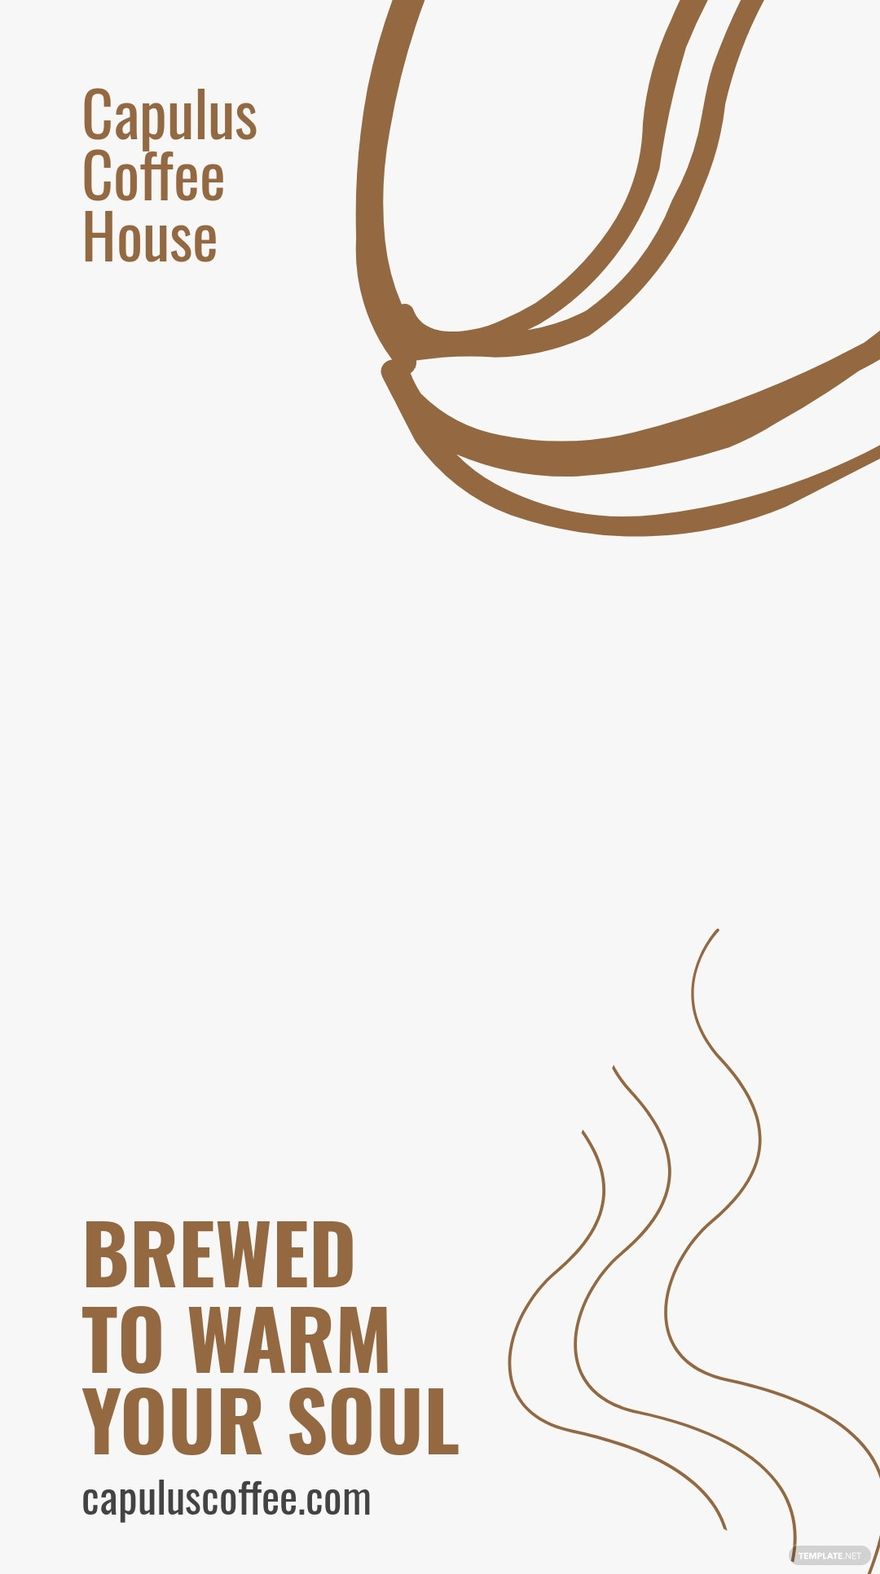 Free Coffee Shop Advertisement Snapchat Geofilter Template